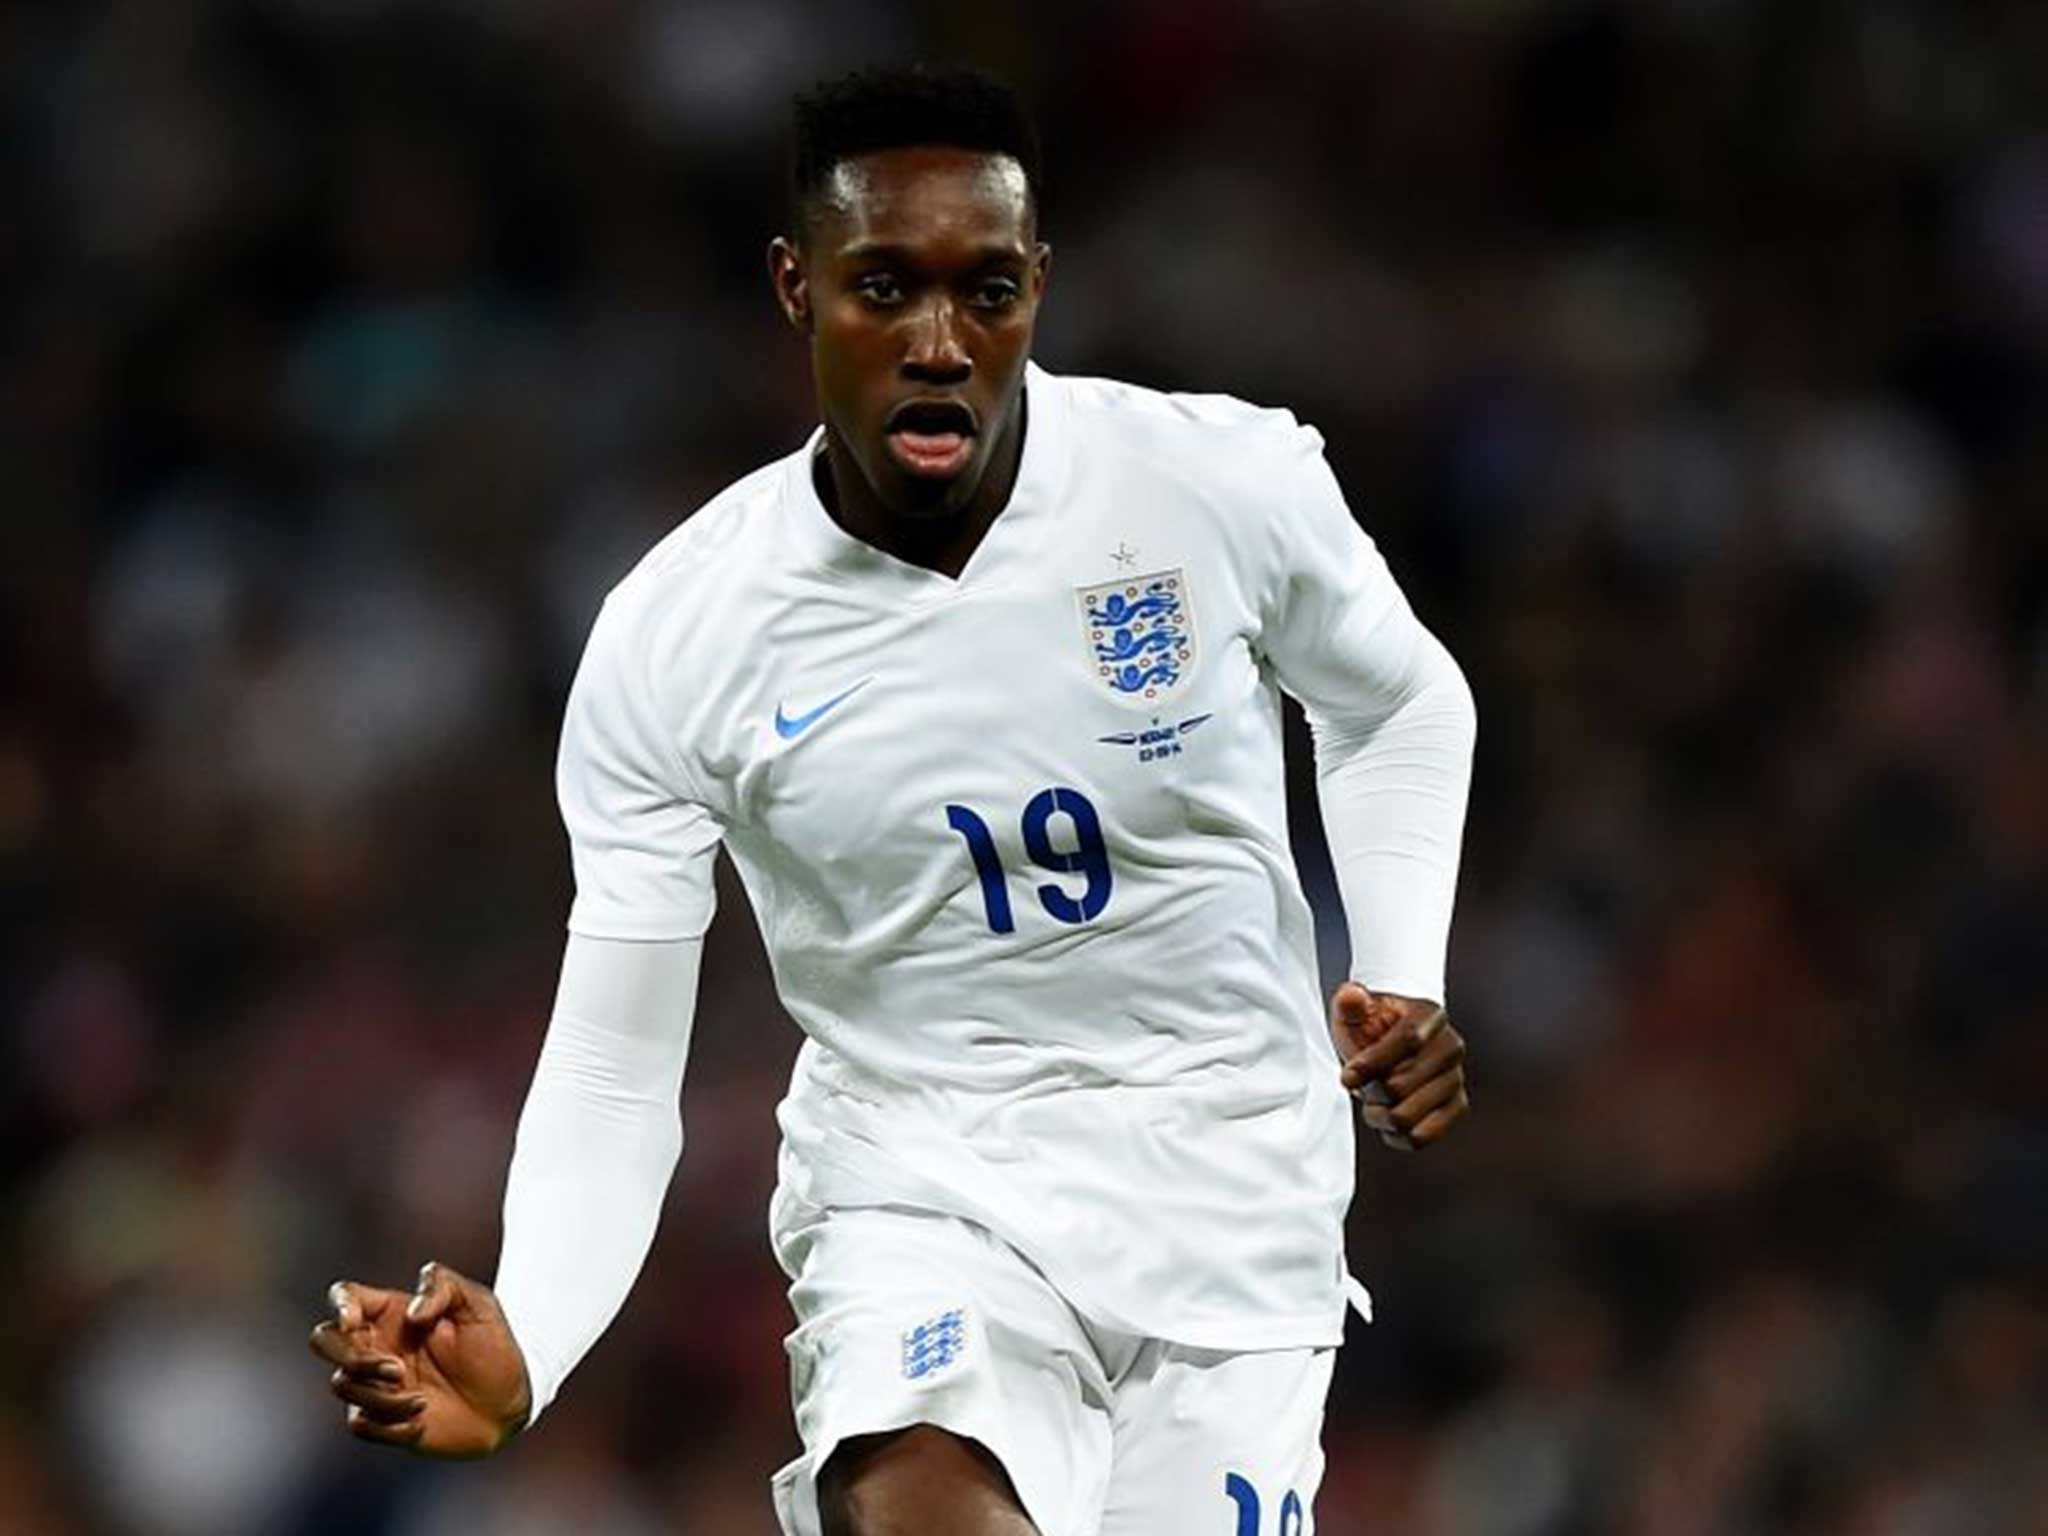 Cutting edge: Danny Welbeck, who has made no secret of his preference for the No 9 shirt, knows that he must deliver for England